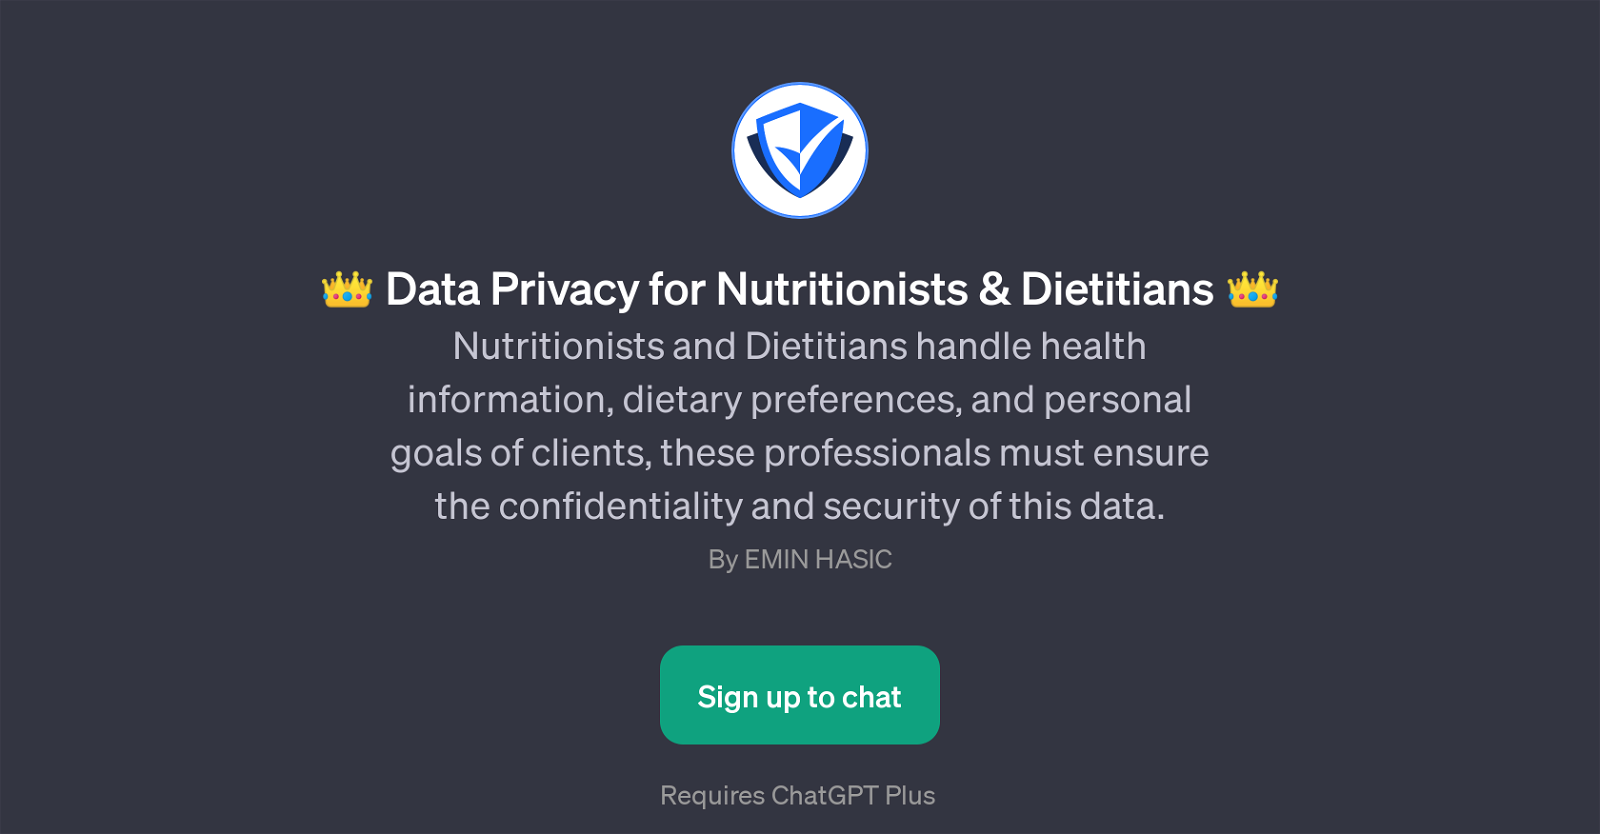 Data Privacy for Nutritionists & Dietitians GPT website